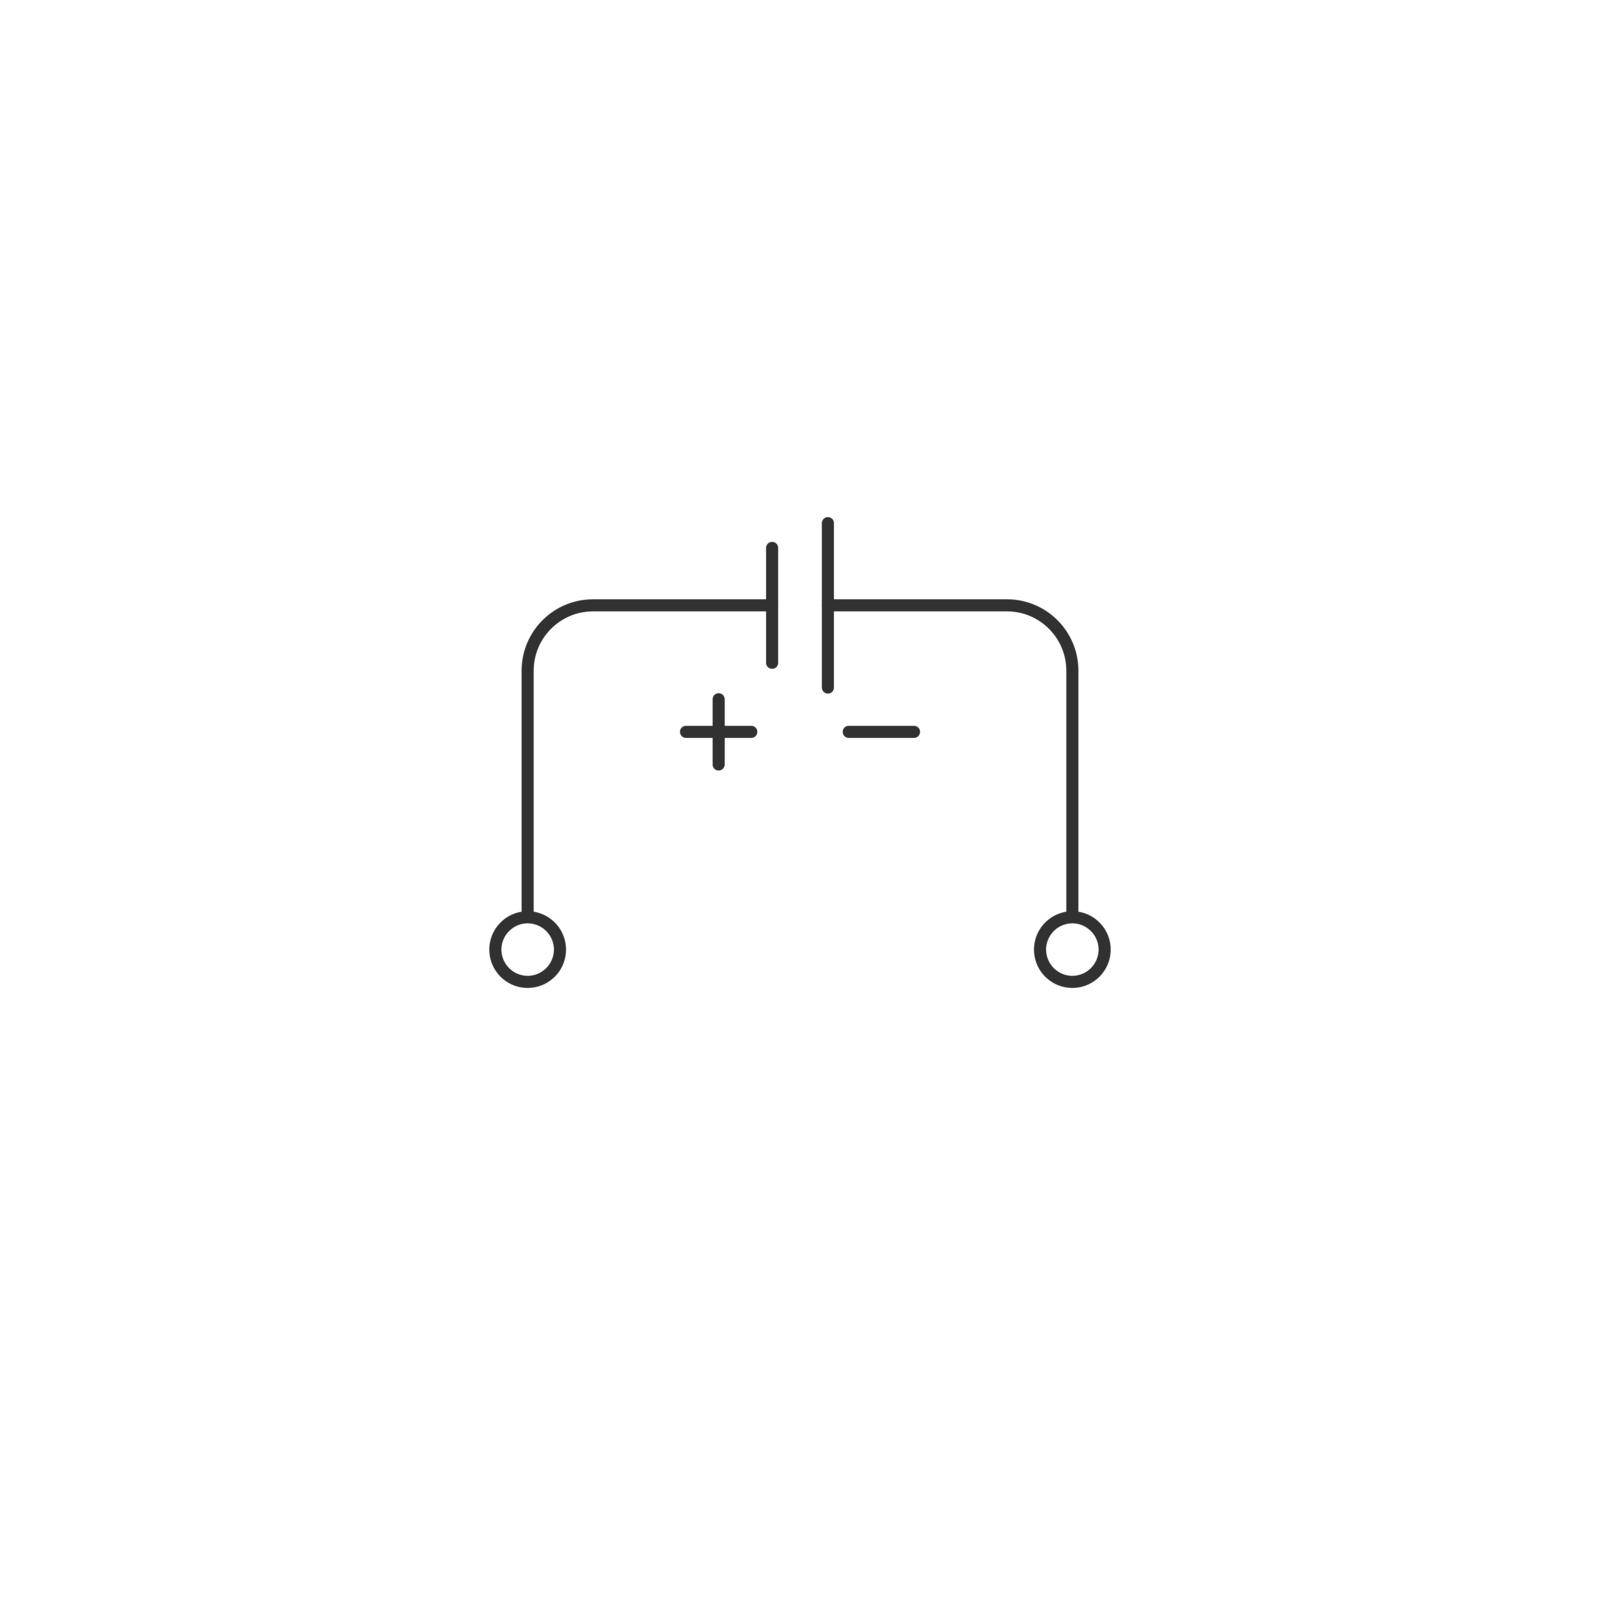 Electric scheme of electrical source contact icon. Plus minus Outline illustration of electric scheme vector icon for web design isolated